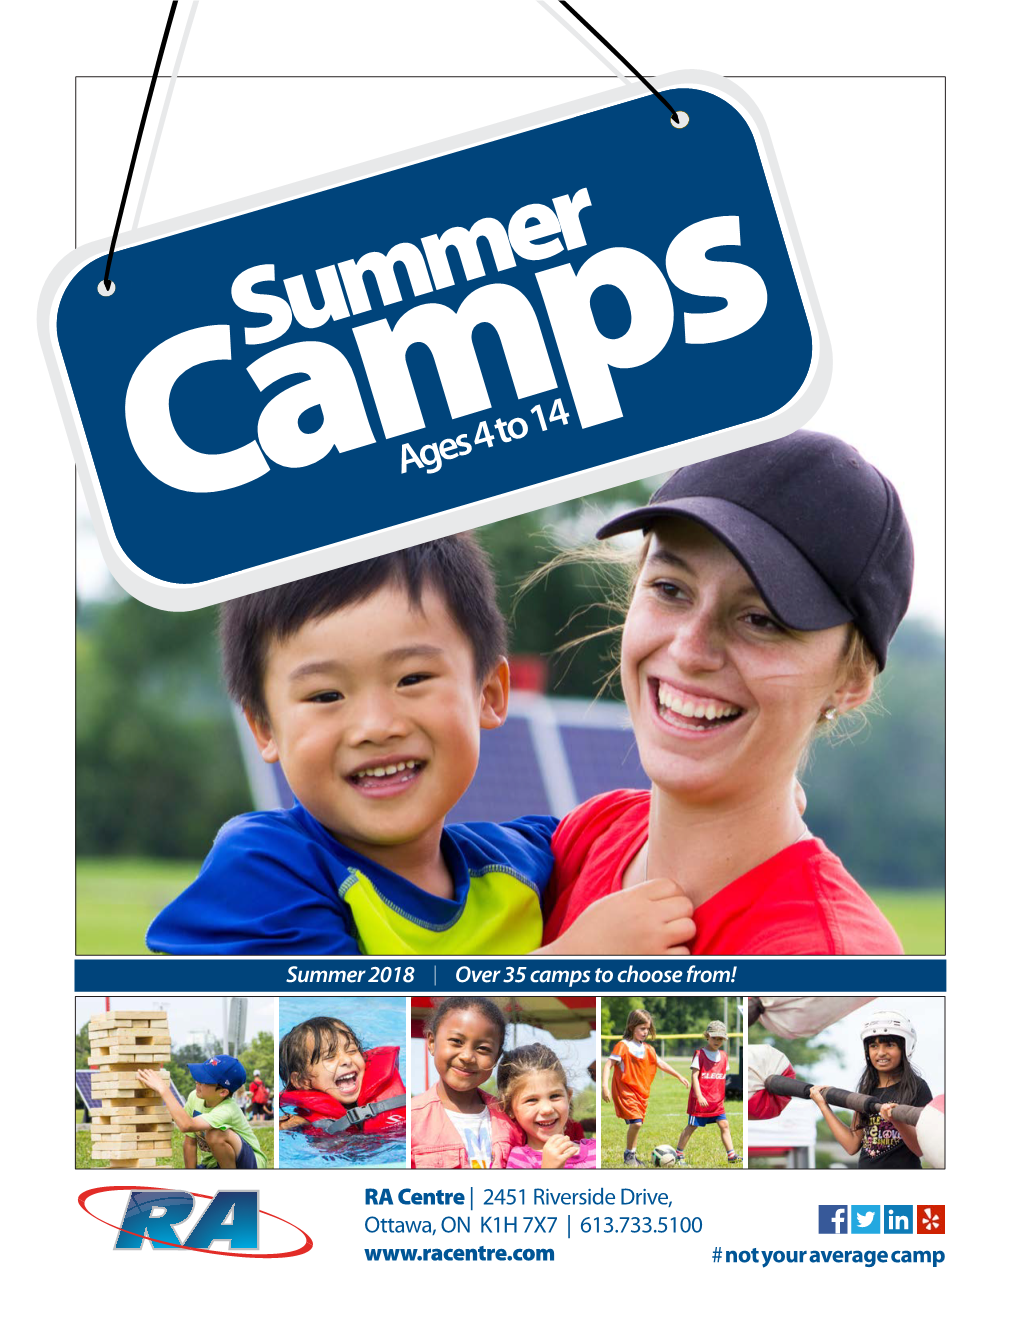 Summer Campsages 4 to 14